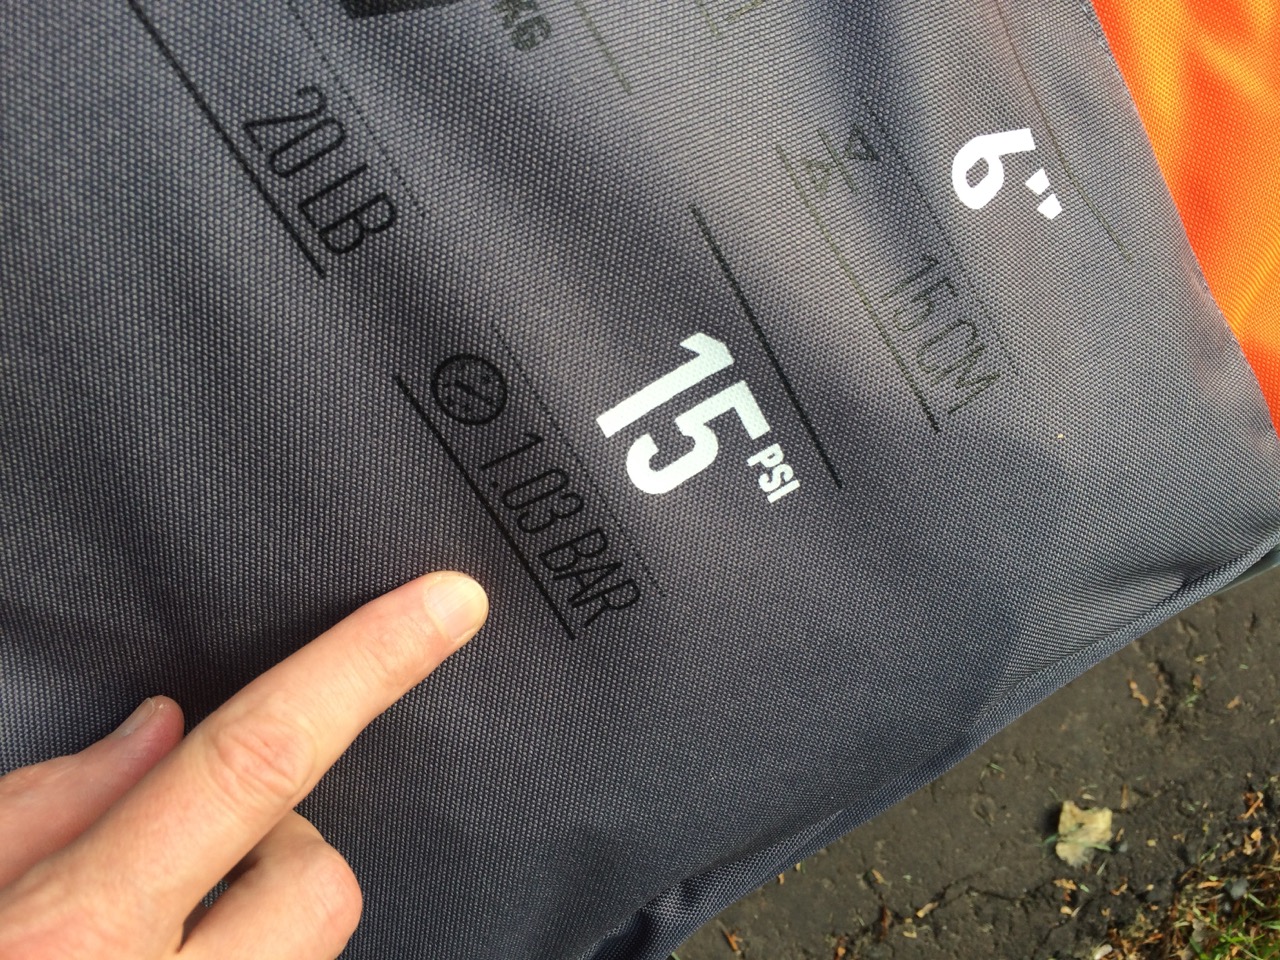 Pressure indicated directly on the ITIWIT inflatable SUP board bag